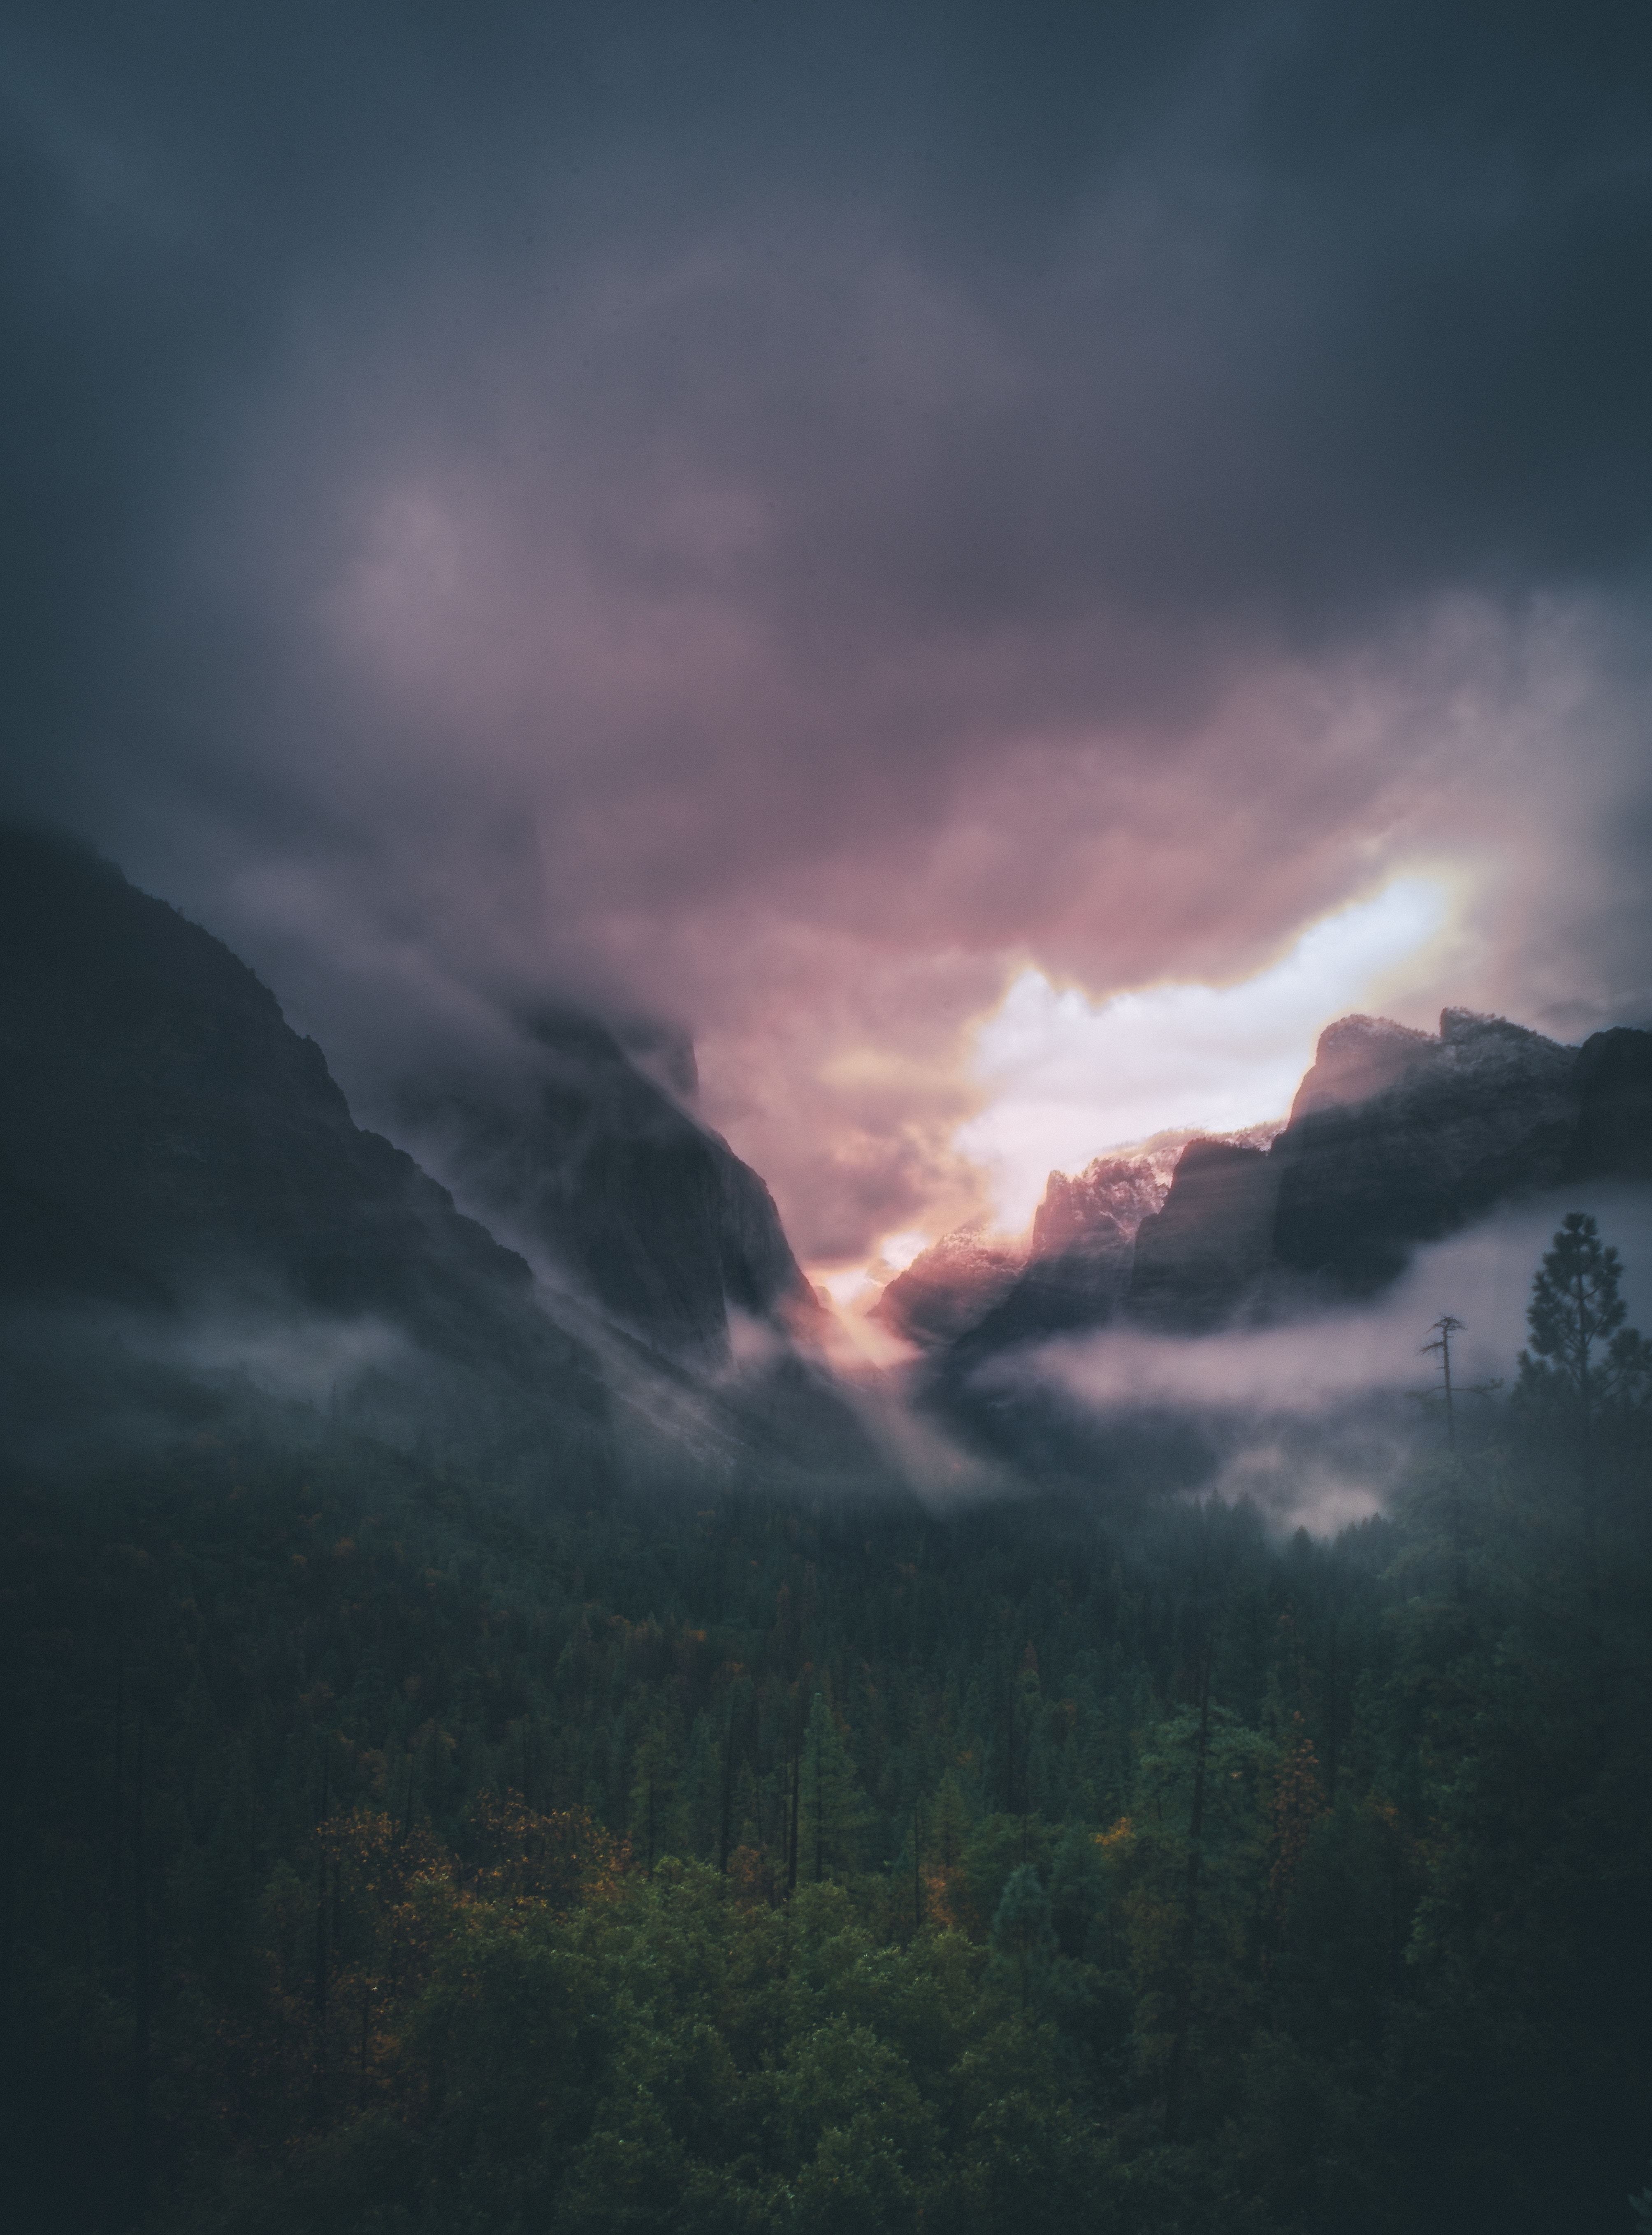 trees, view from above, nature, sky, mountains, clouds, fog